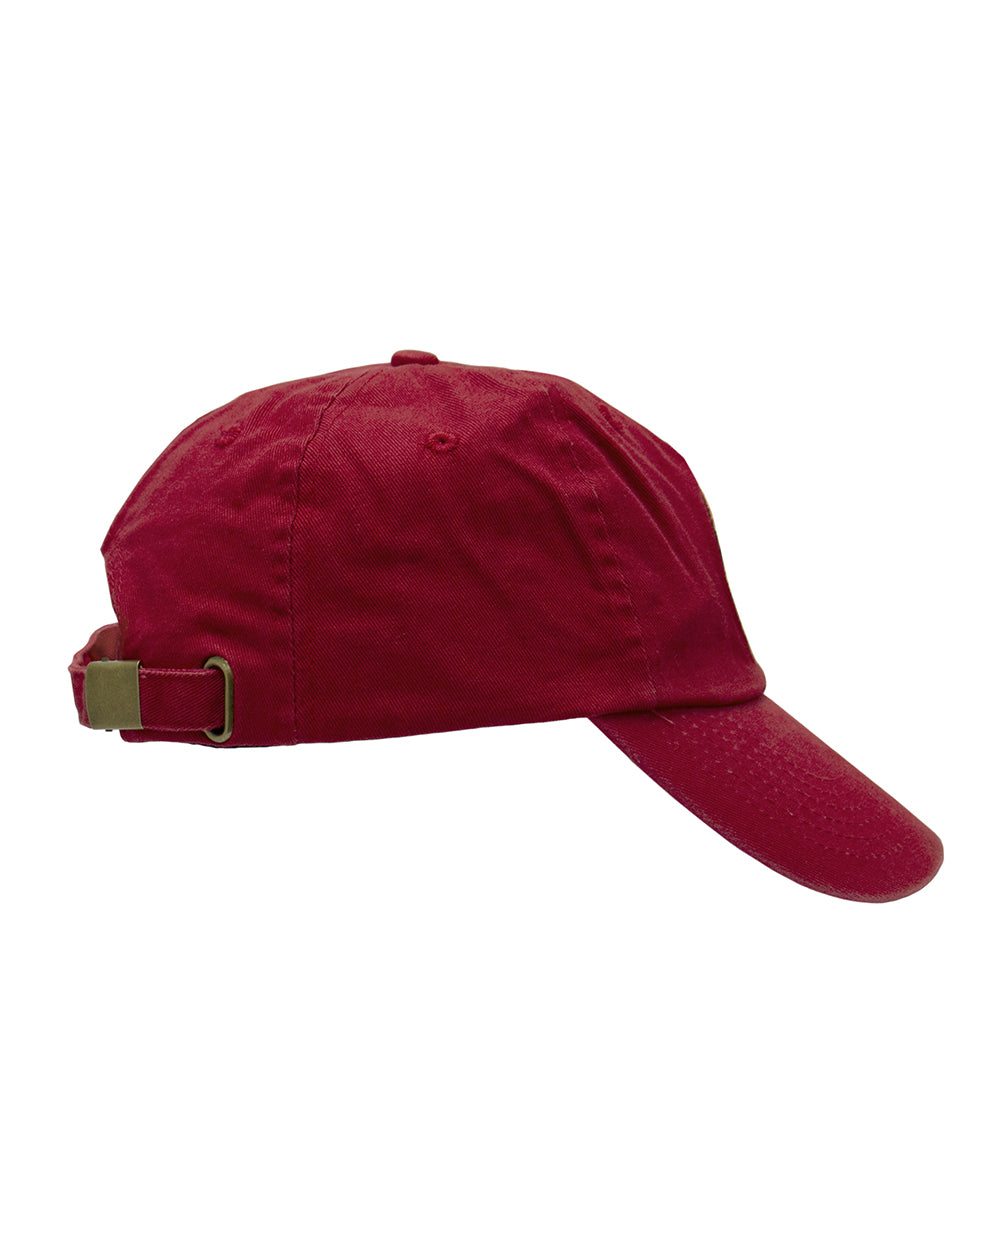 Lion Red Retro Cap -  Beer Gear Apparel & Merchandise - Speights - Lion Red - VB - Tokyo Dy merch